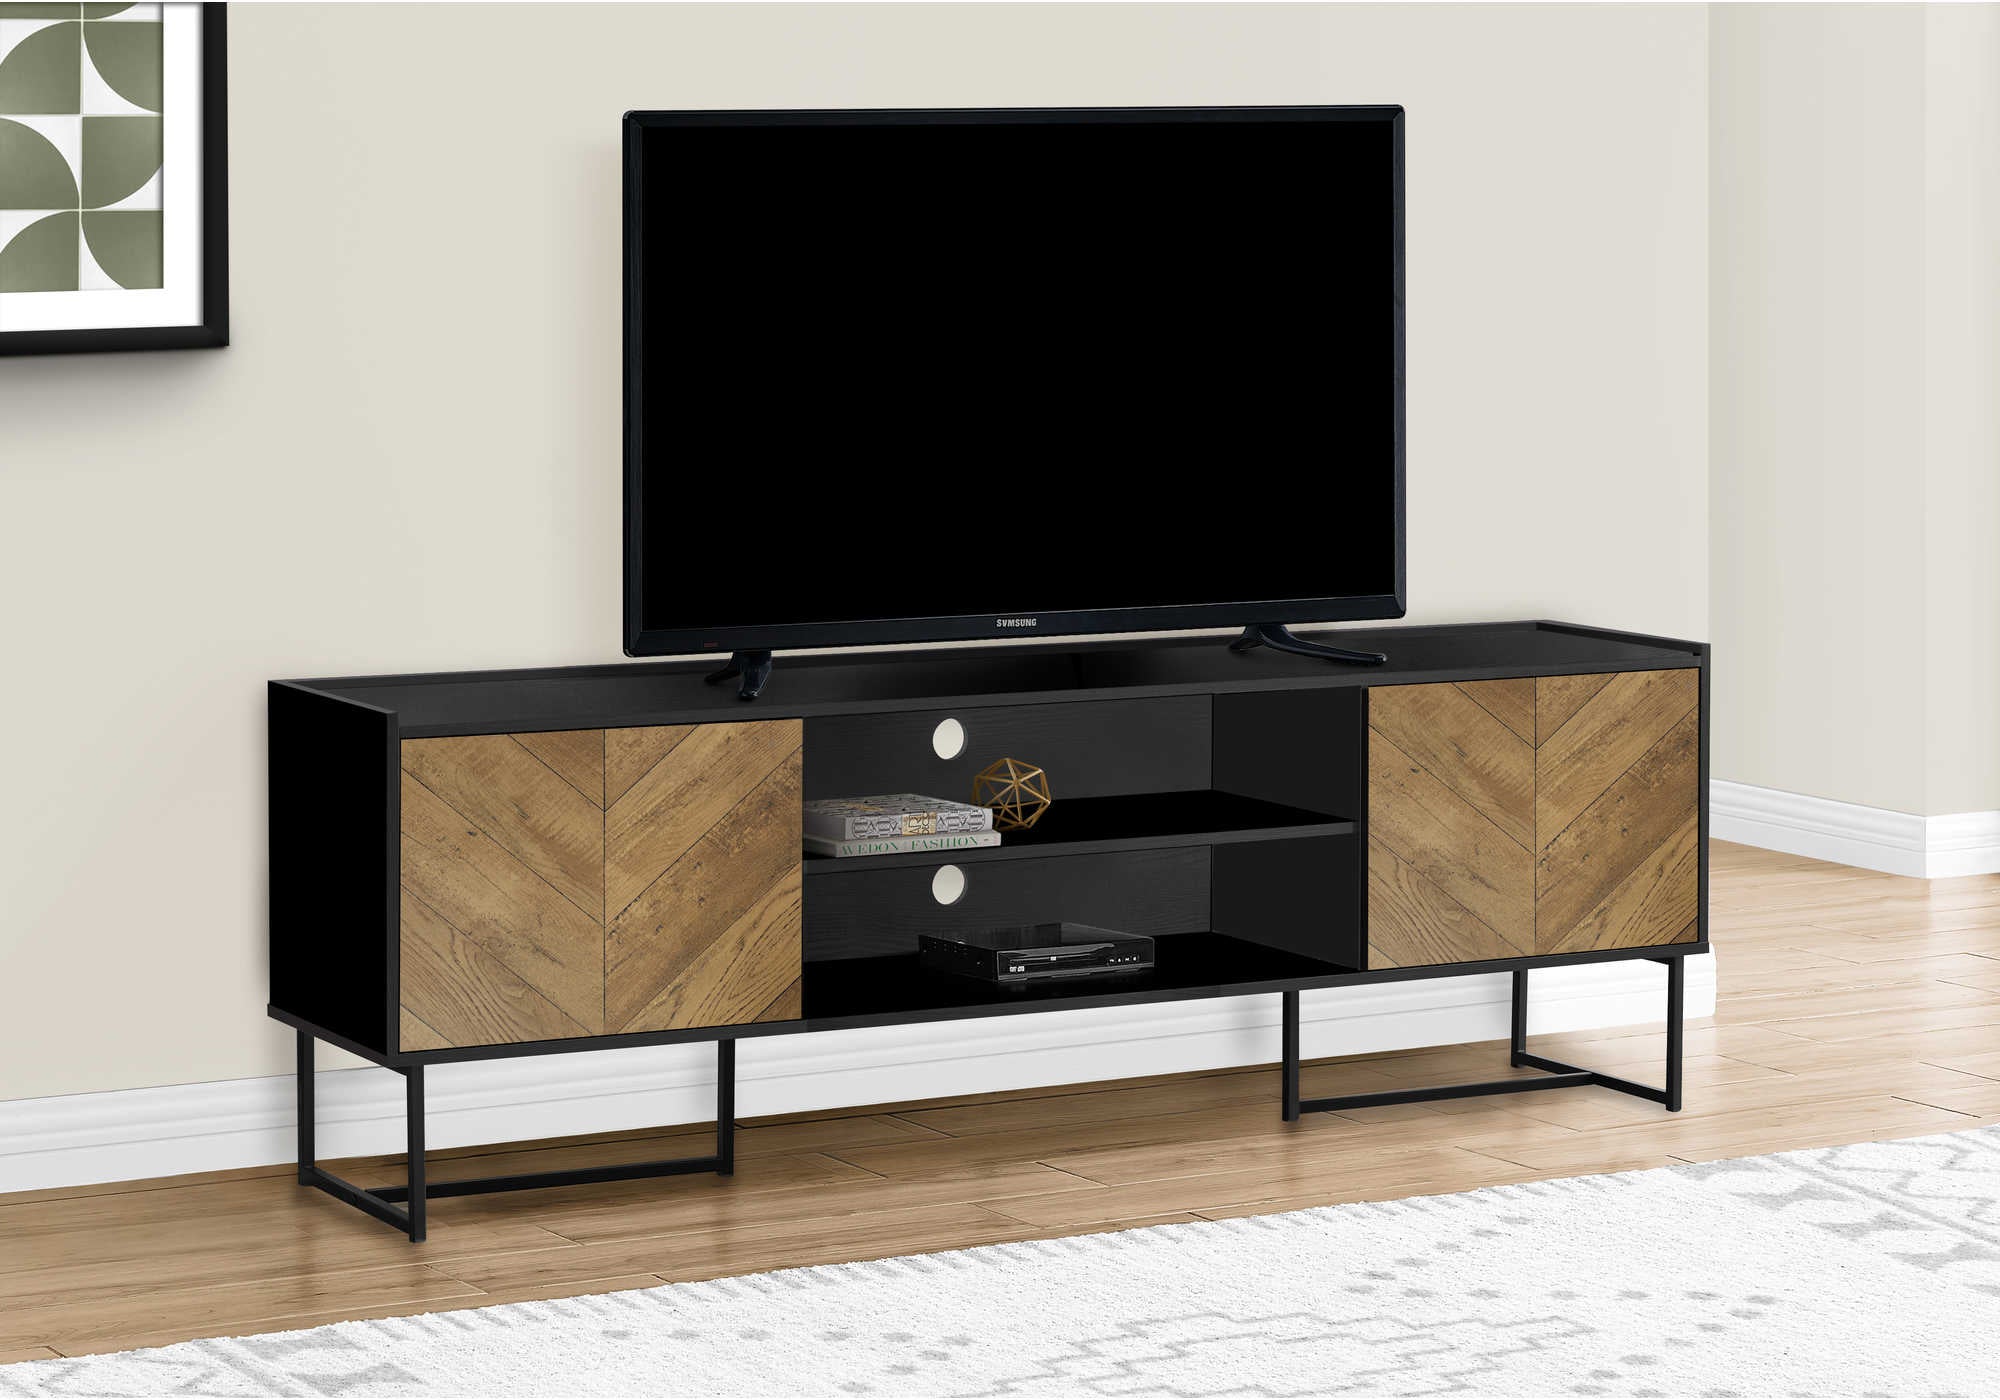 I 2752 - TV STAND - 72"L / BLACK / METAL WITH 2 WOOD-LOOK DOORS BY MONARCH SPECIALTIES INC